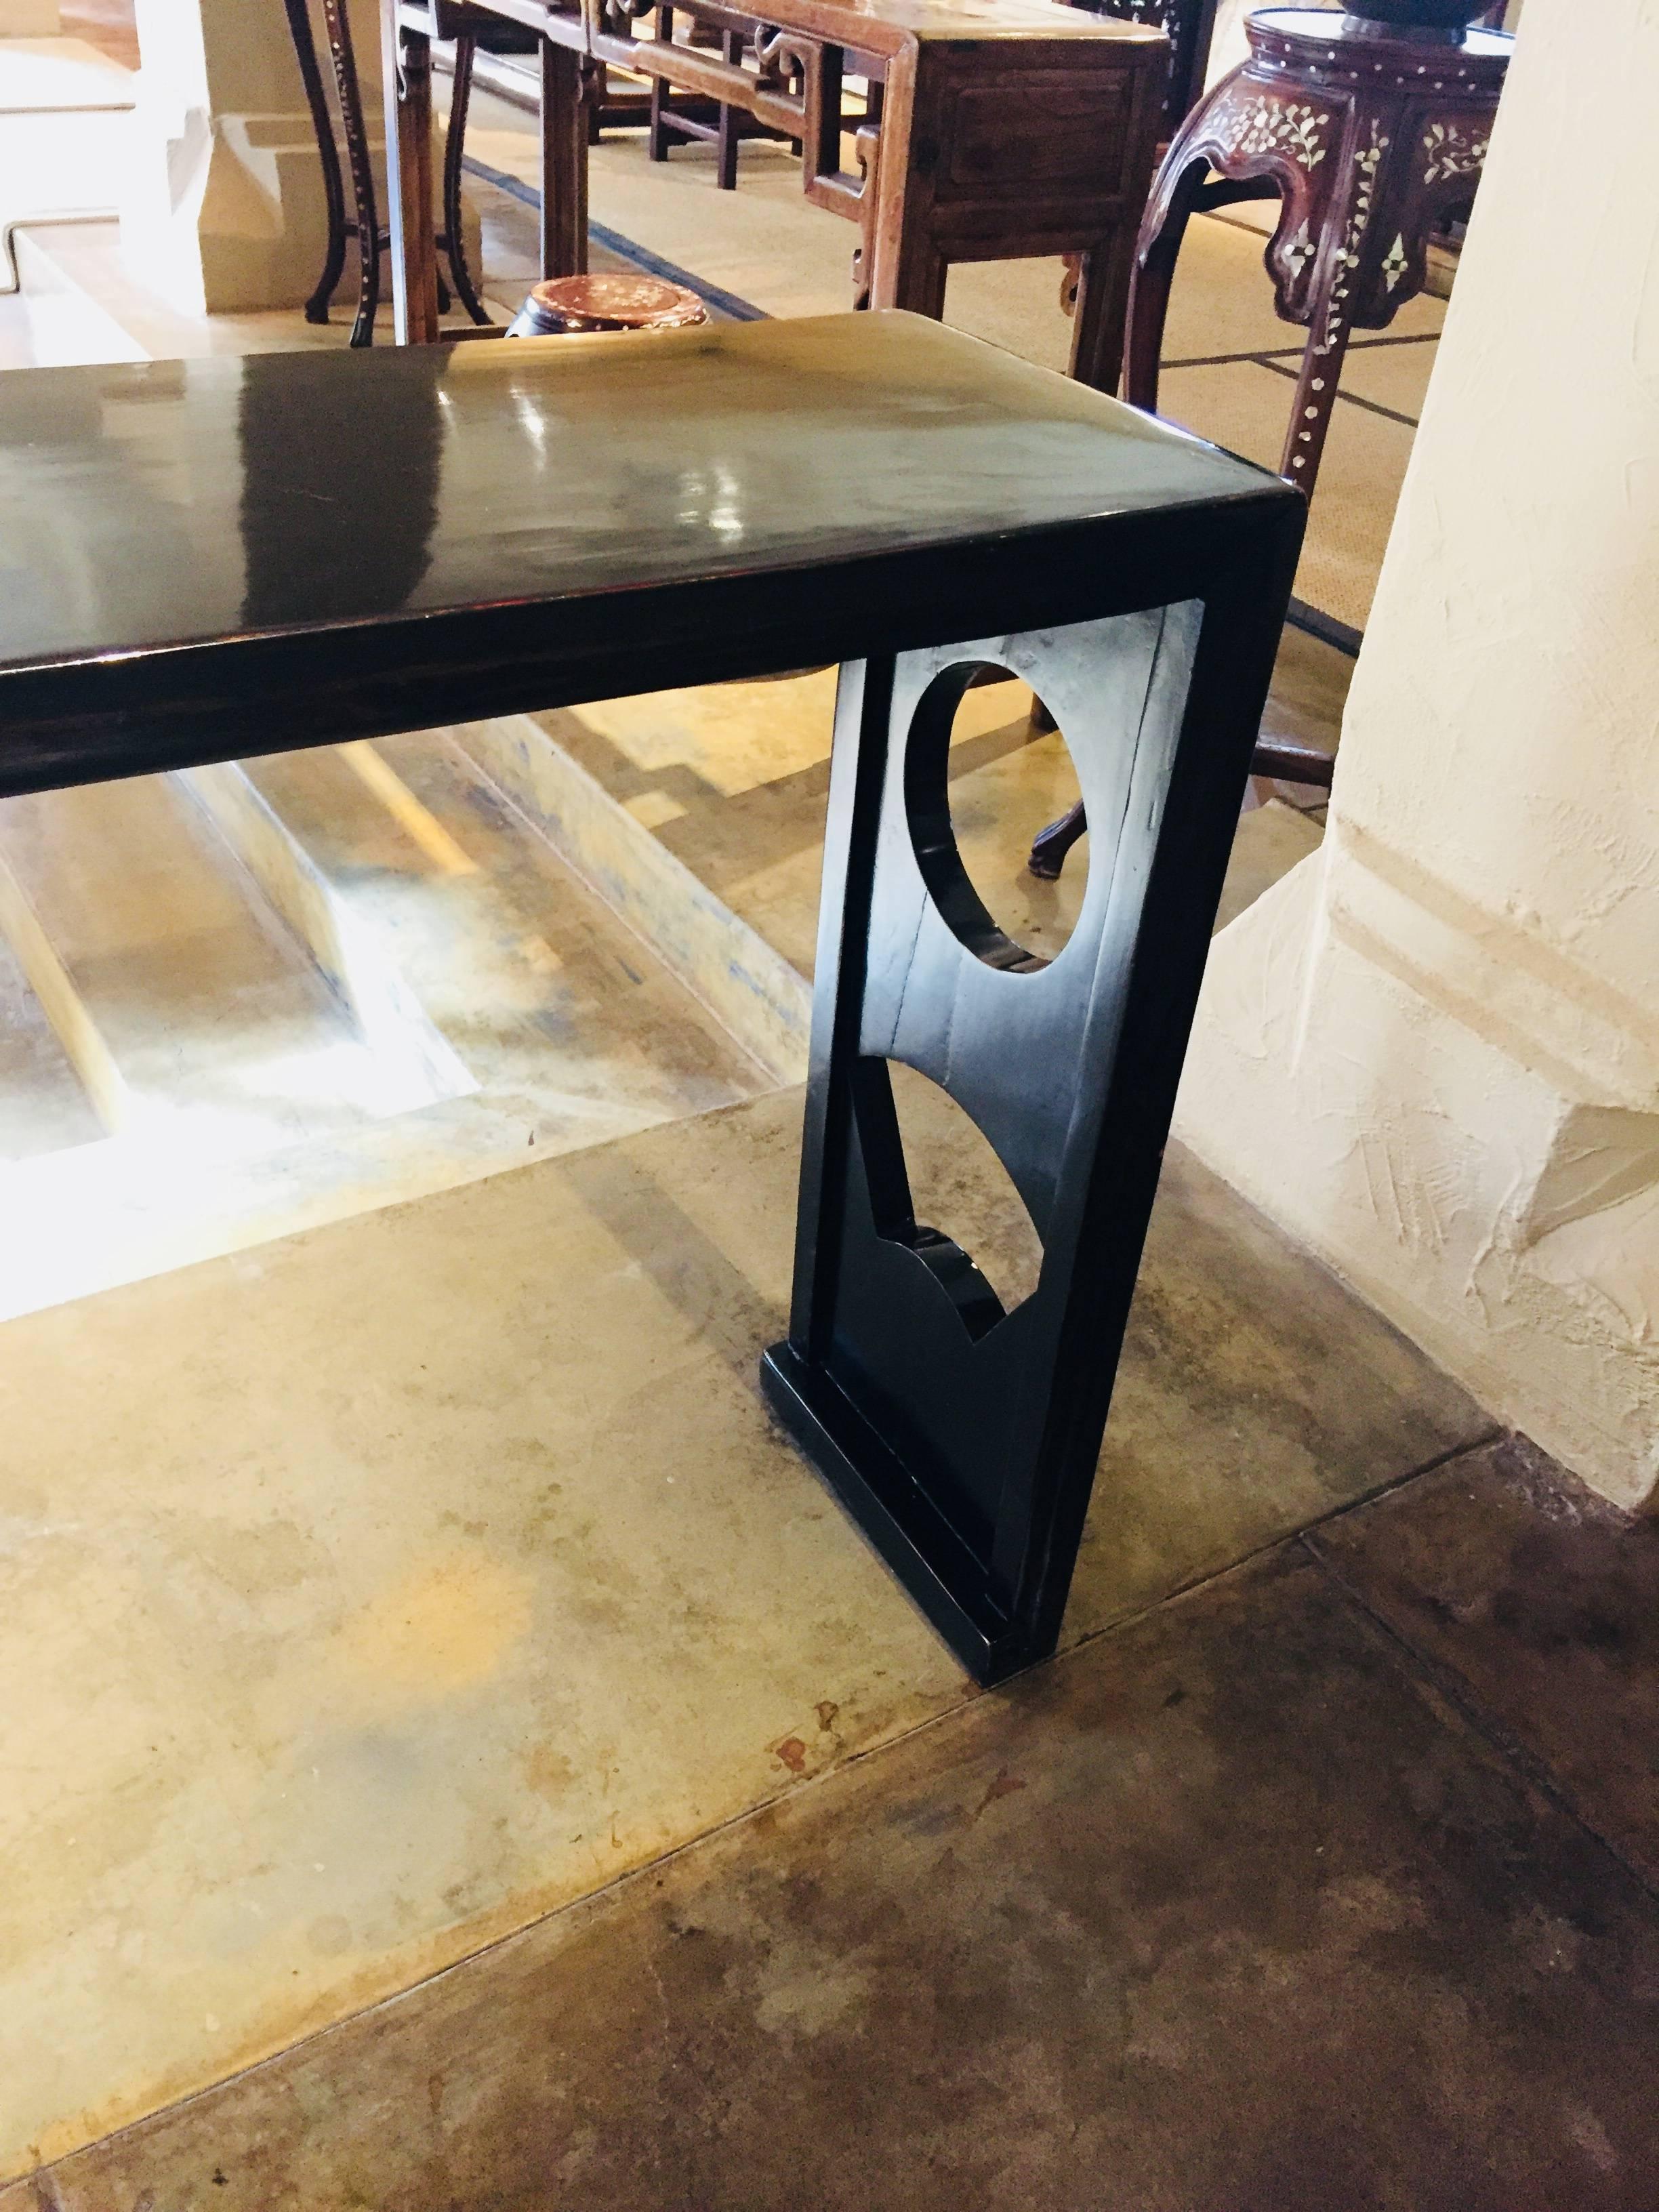 This unique black lacquer wood console table is from China from the Shanxi Province.
It is 75 L x 12 D x 33 H

It has a modern look with the cut outs in the legs, circle and a half circle. 

The finish is lovely.